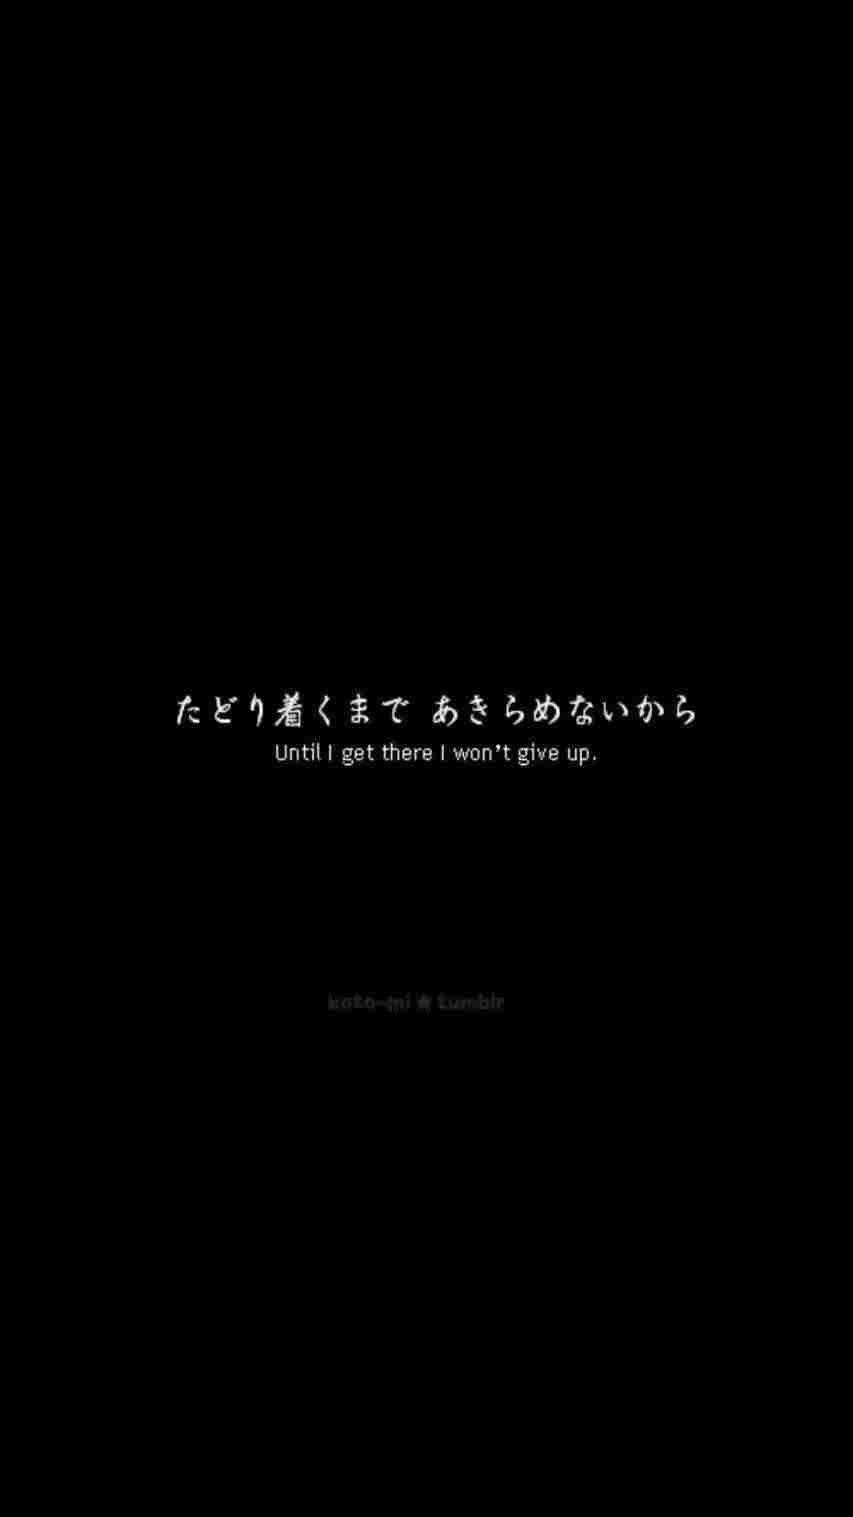 A black screen with text in japanese - Grunge